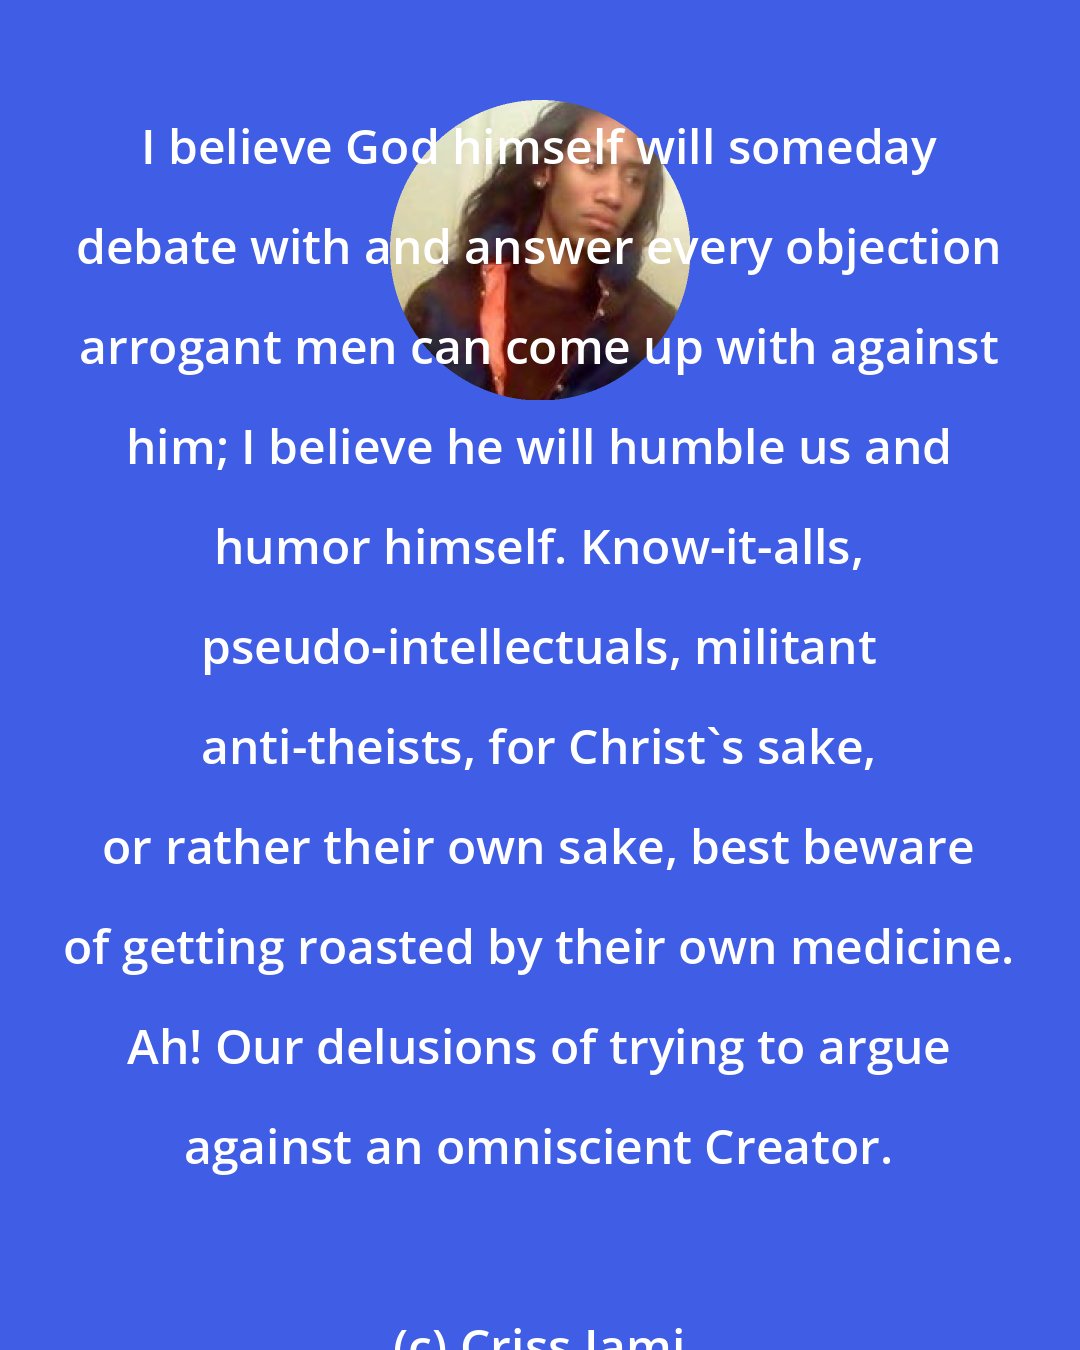 Criss Jami: I believe God himself will someday debate with and answer every objection arrogant men can come up with against him; I believe he will humble us and humor himself. Know-it-alls, pseudo-intellectuals, militant anti-theists, for Christ's sake, or rather their own sake, best beware of getting roasted by their own medicine. Ah! Our delusions of trying to argue against an omniscient Creator.